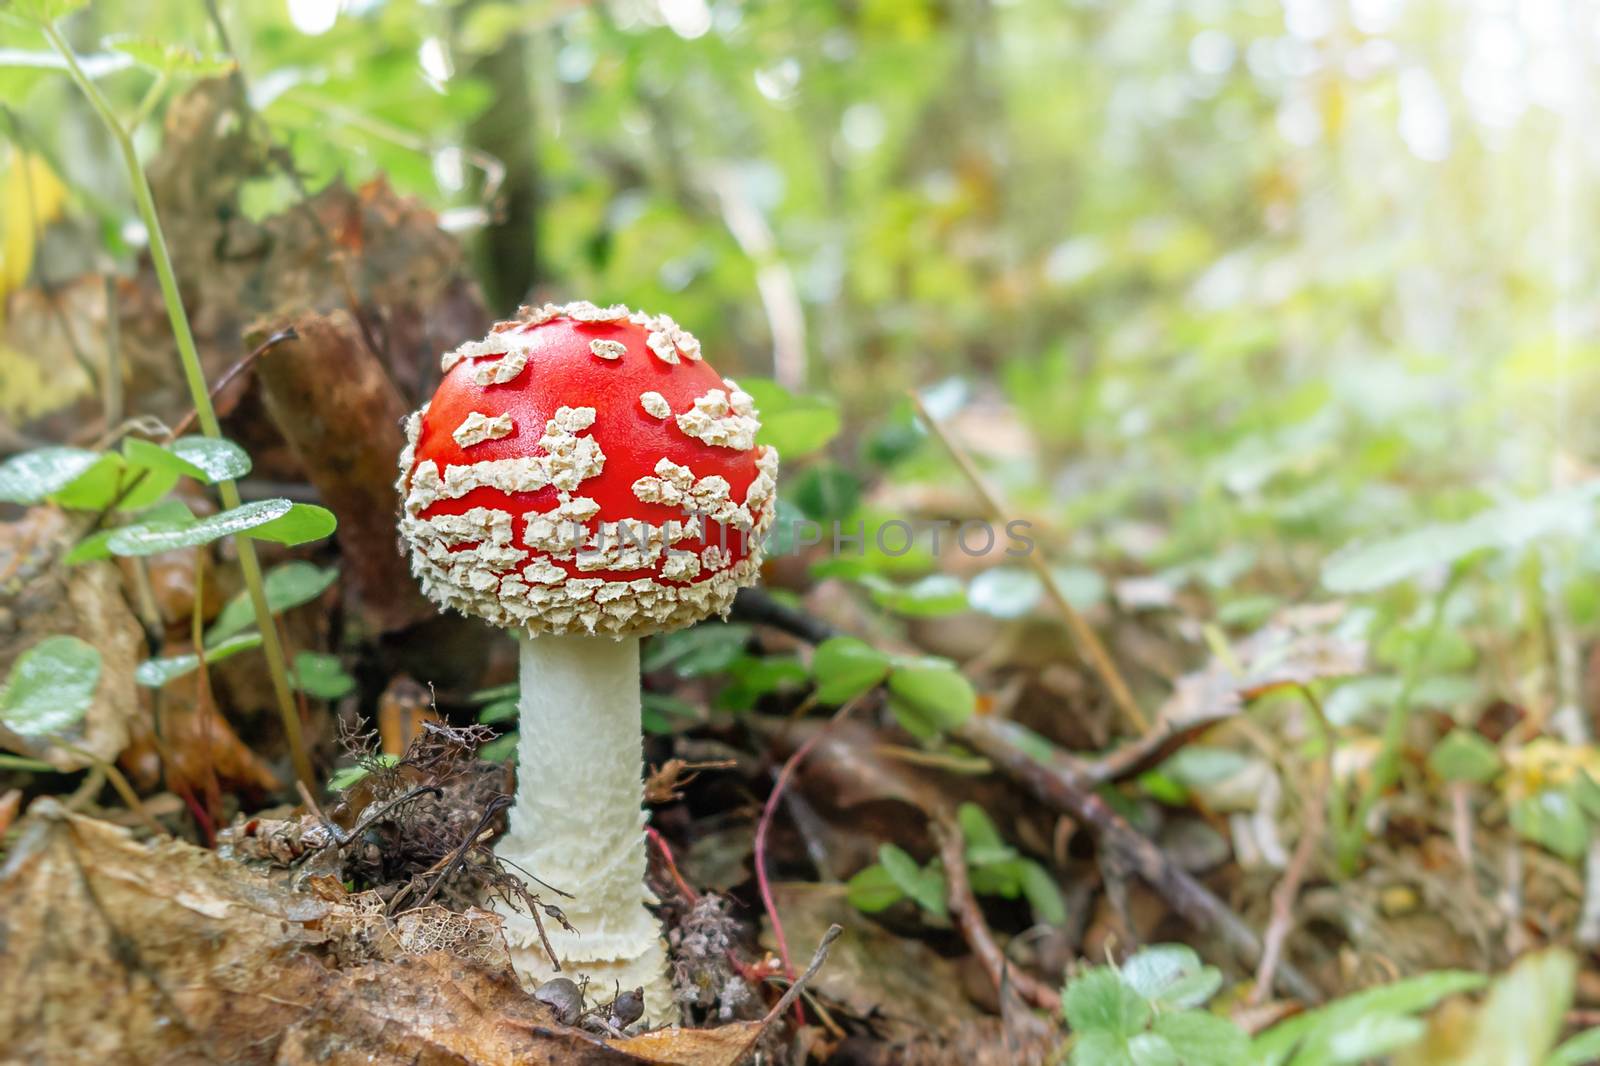 Small mushroom amanita known as fly agaric grows in the forest at sunrise - image.